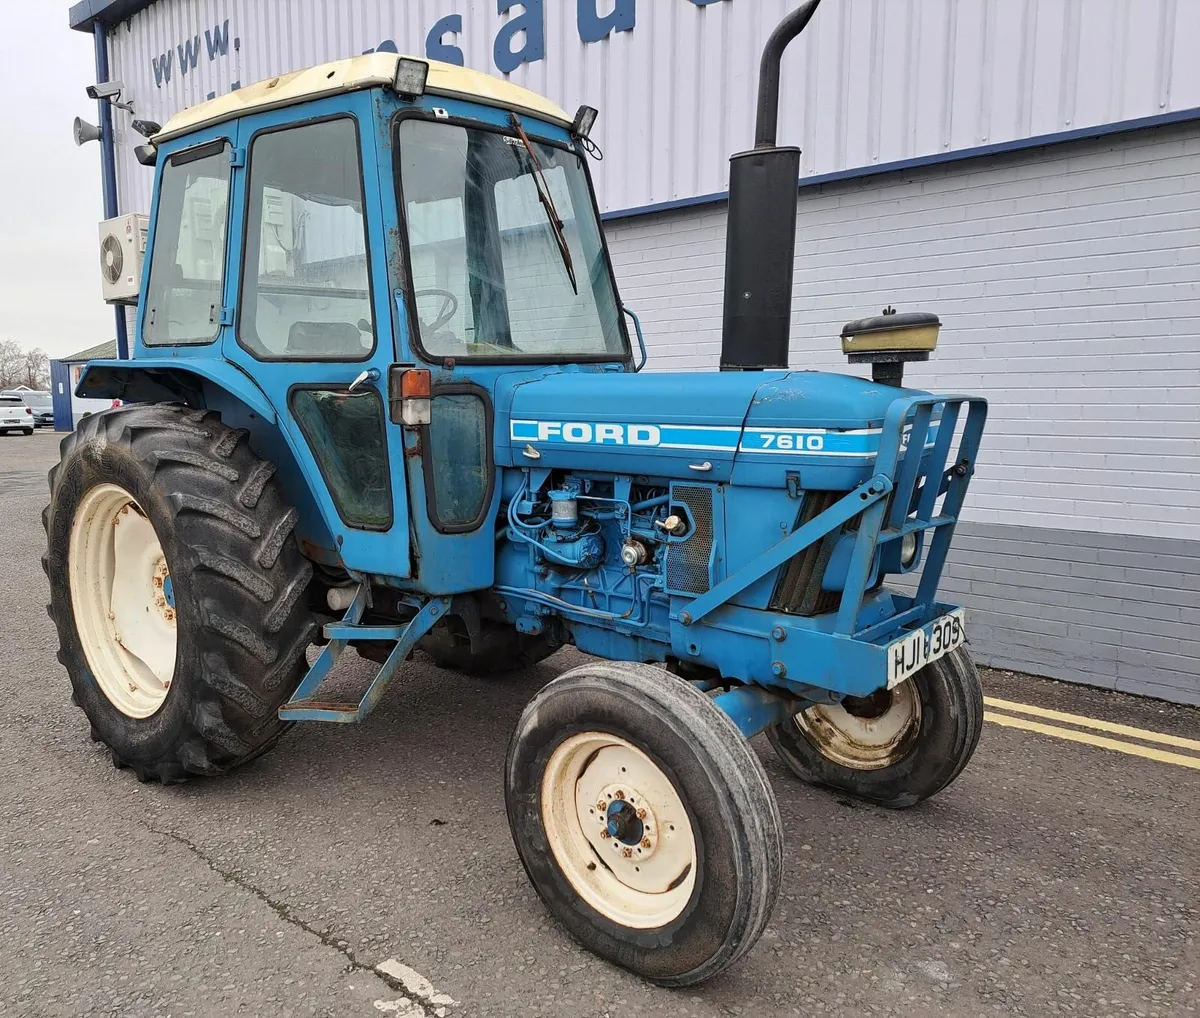 Ford 7610 2wd Tractor for Auction - Image 1